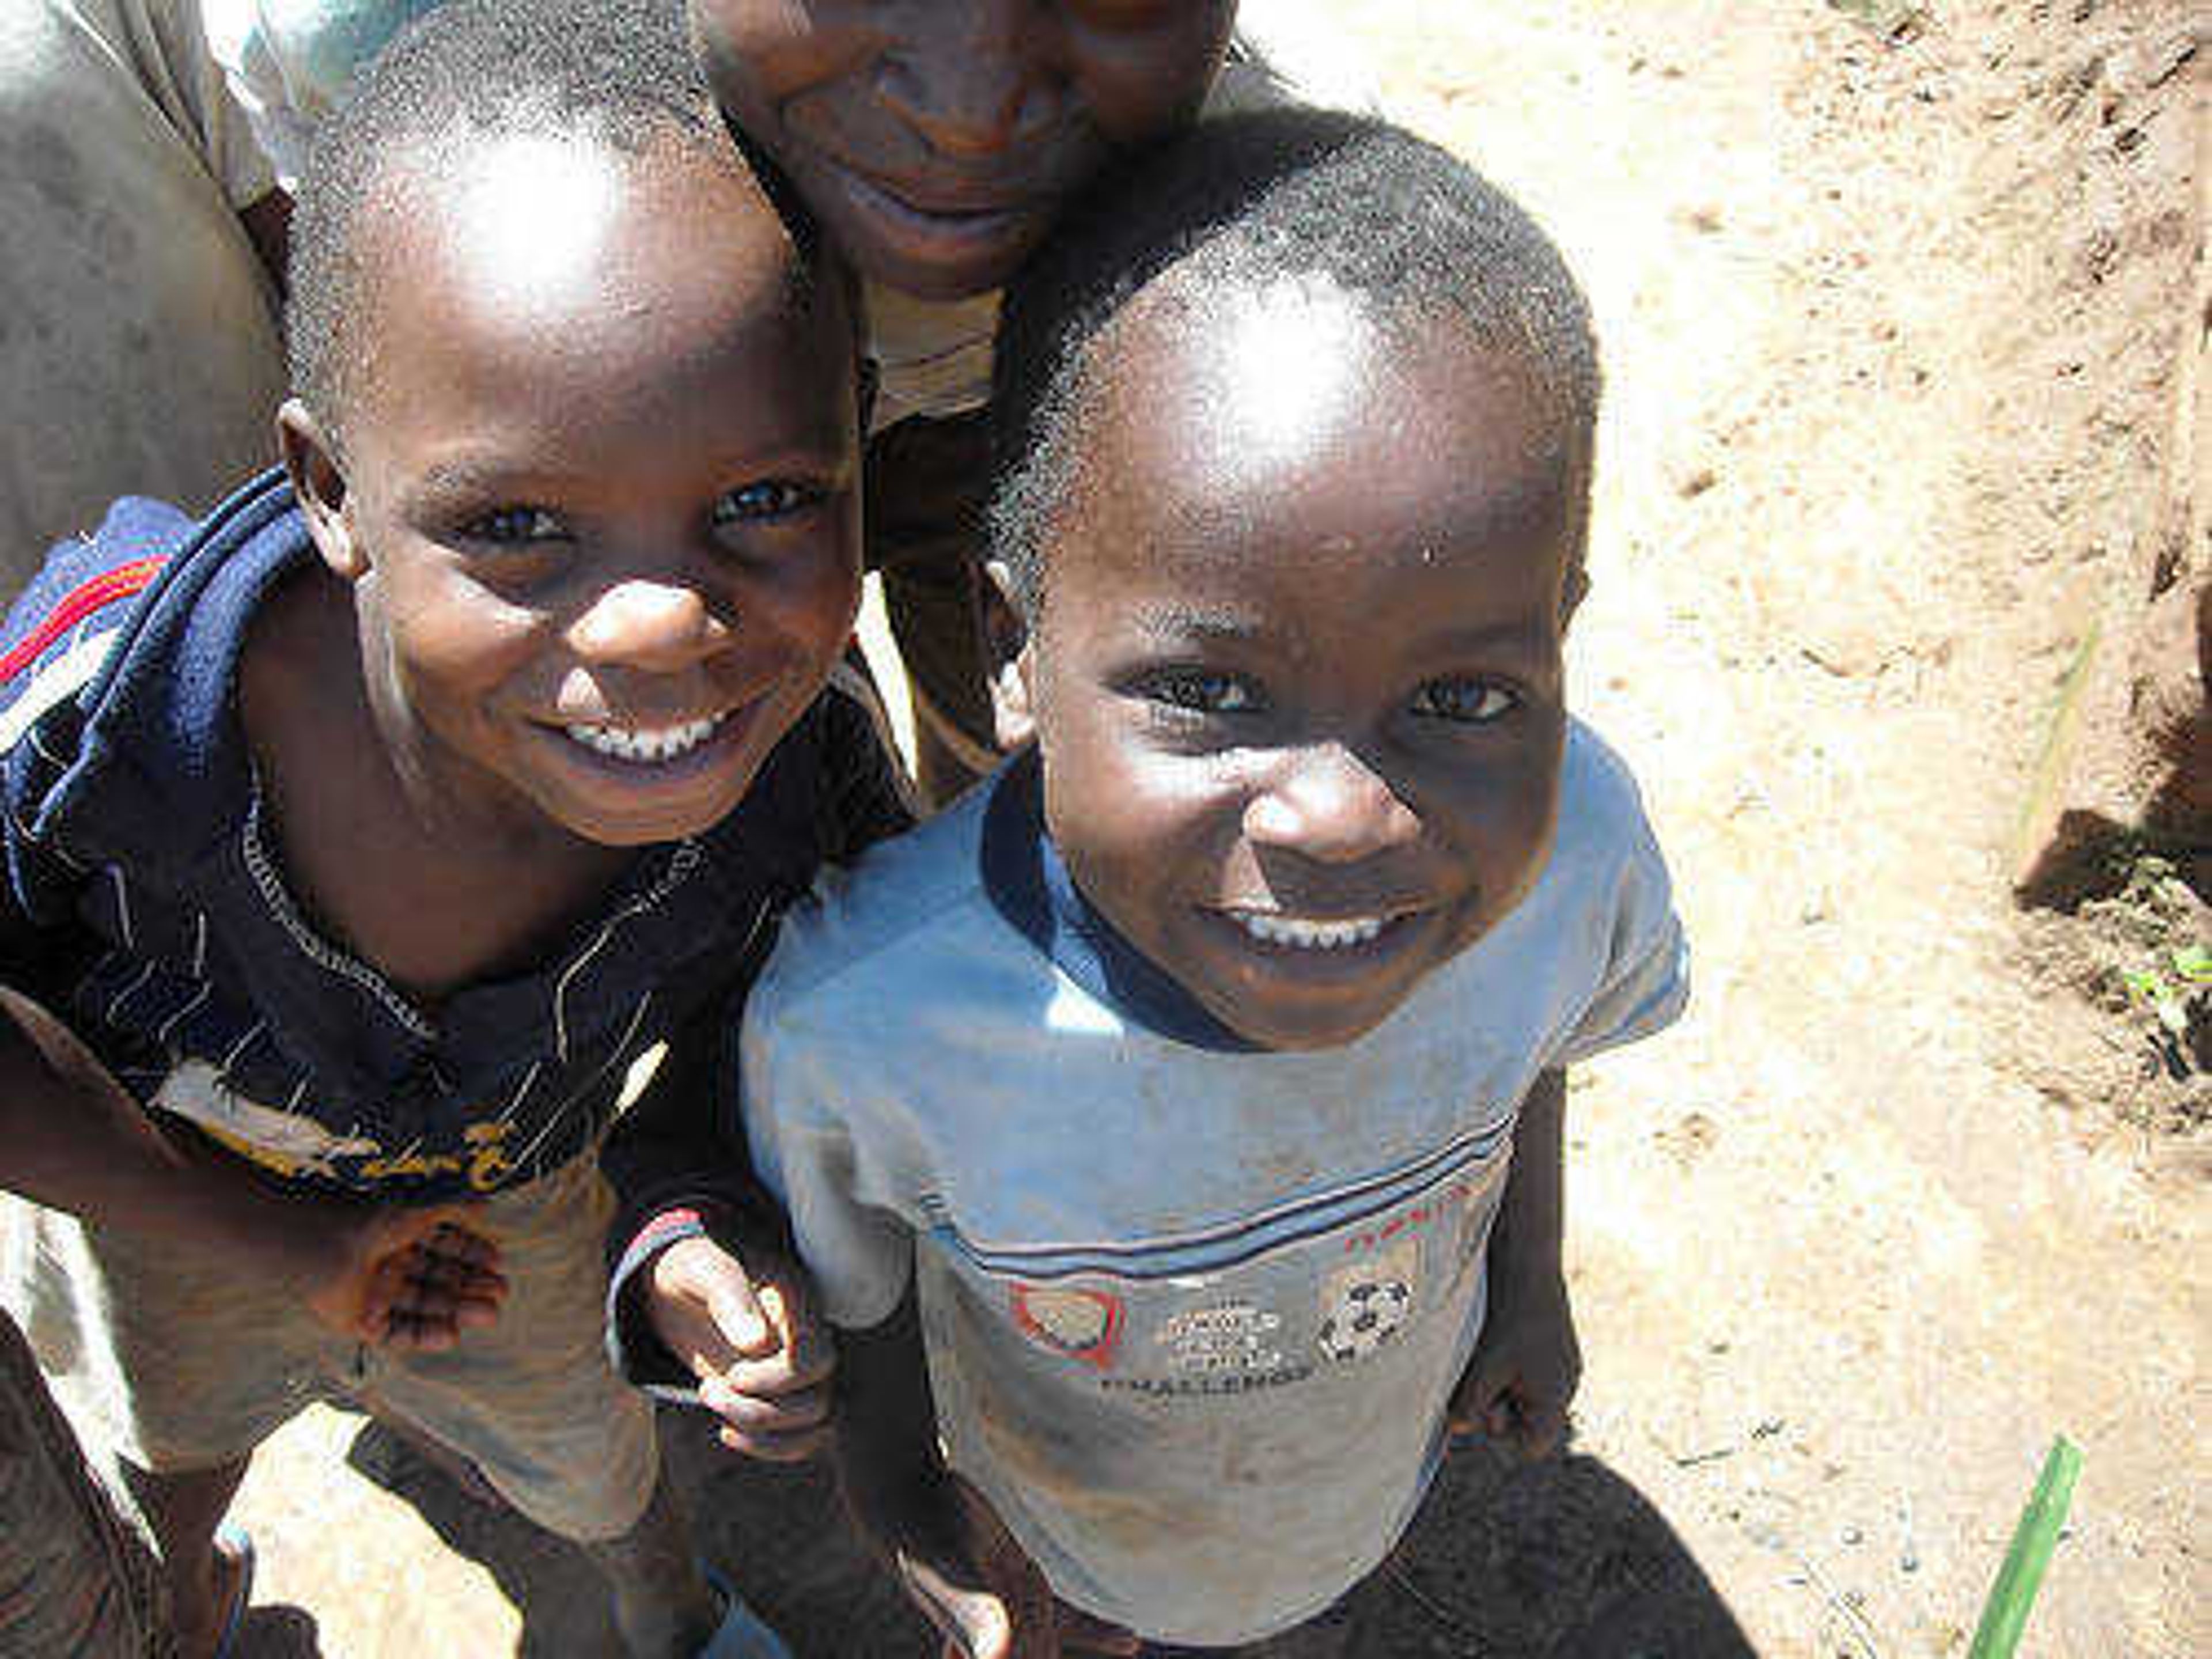 Every dollar raised from Hoops of Hope goes toward children like these in Africa. - Submitted photo